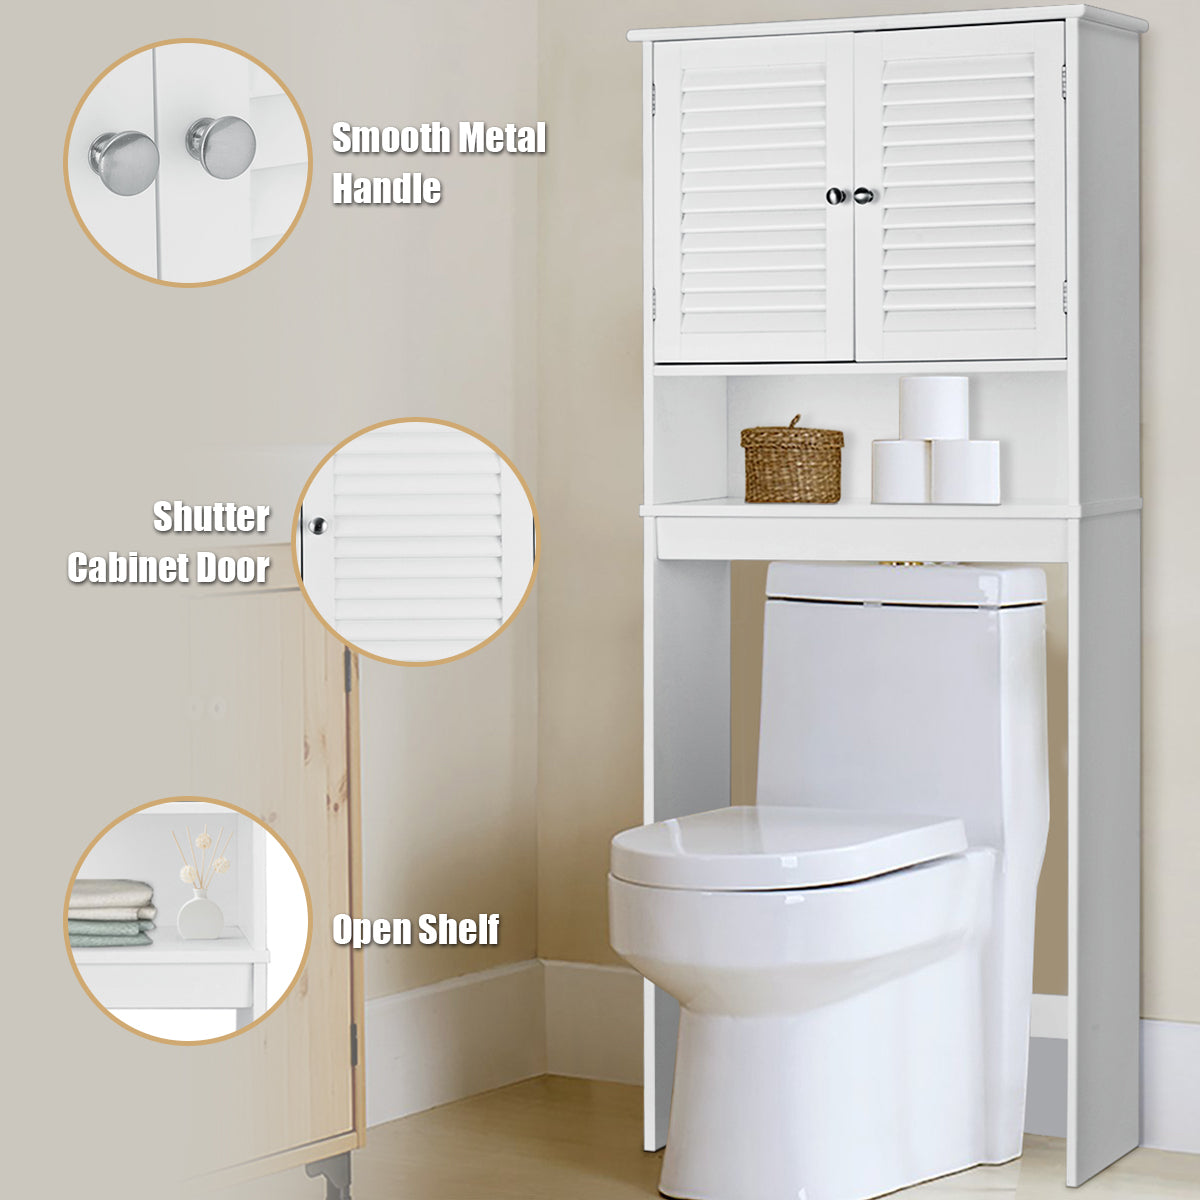 Bathroom Over-The-Toilet Space Saver Storage with Adjustable Shelf